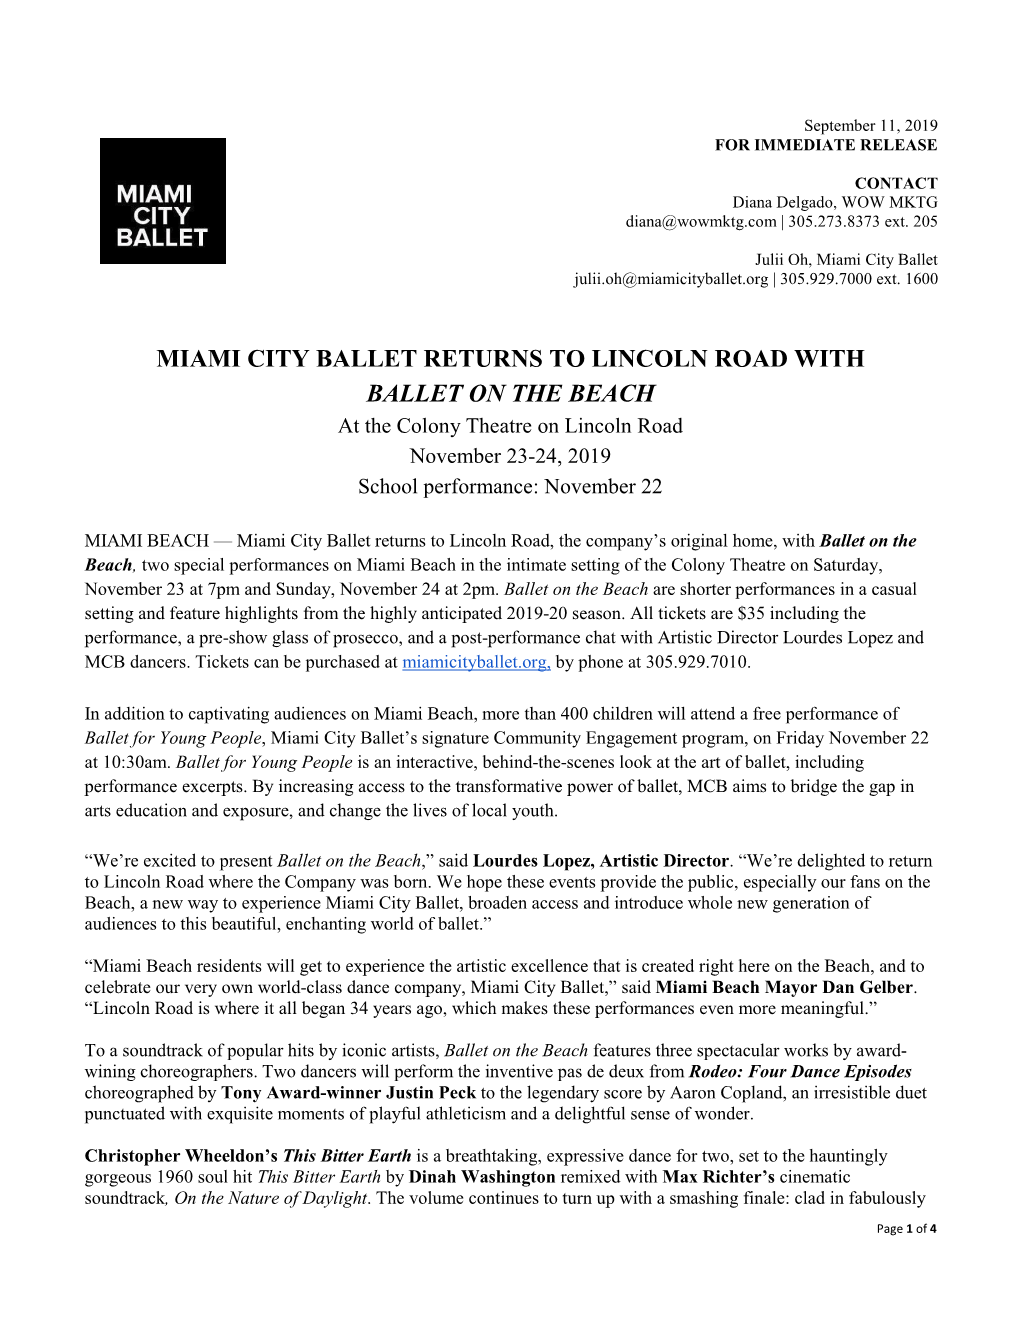 MIAMI CITY BALLET RETURNS to LINCOLN ROAD with BALLET on the BEACH at the Colony Theatre on Lincoln Road November 23-24, 2019 School Performance: November 22